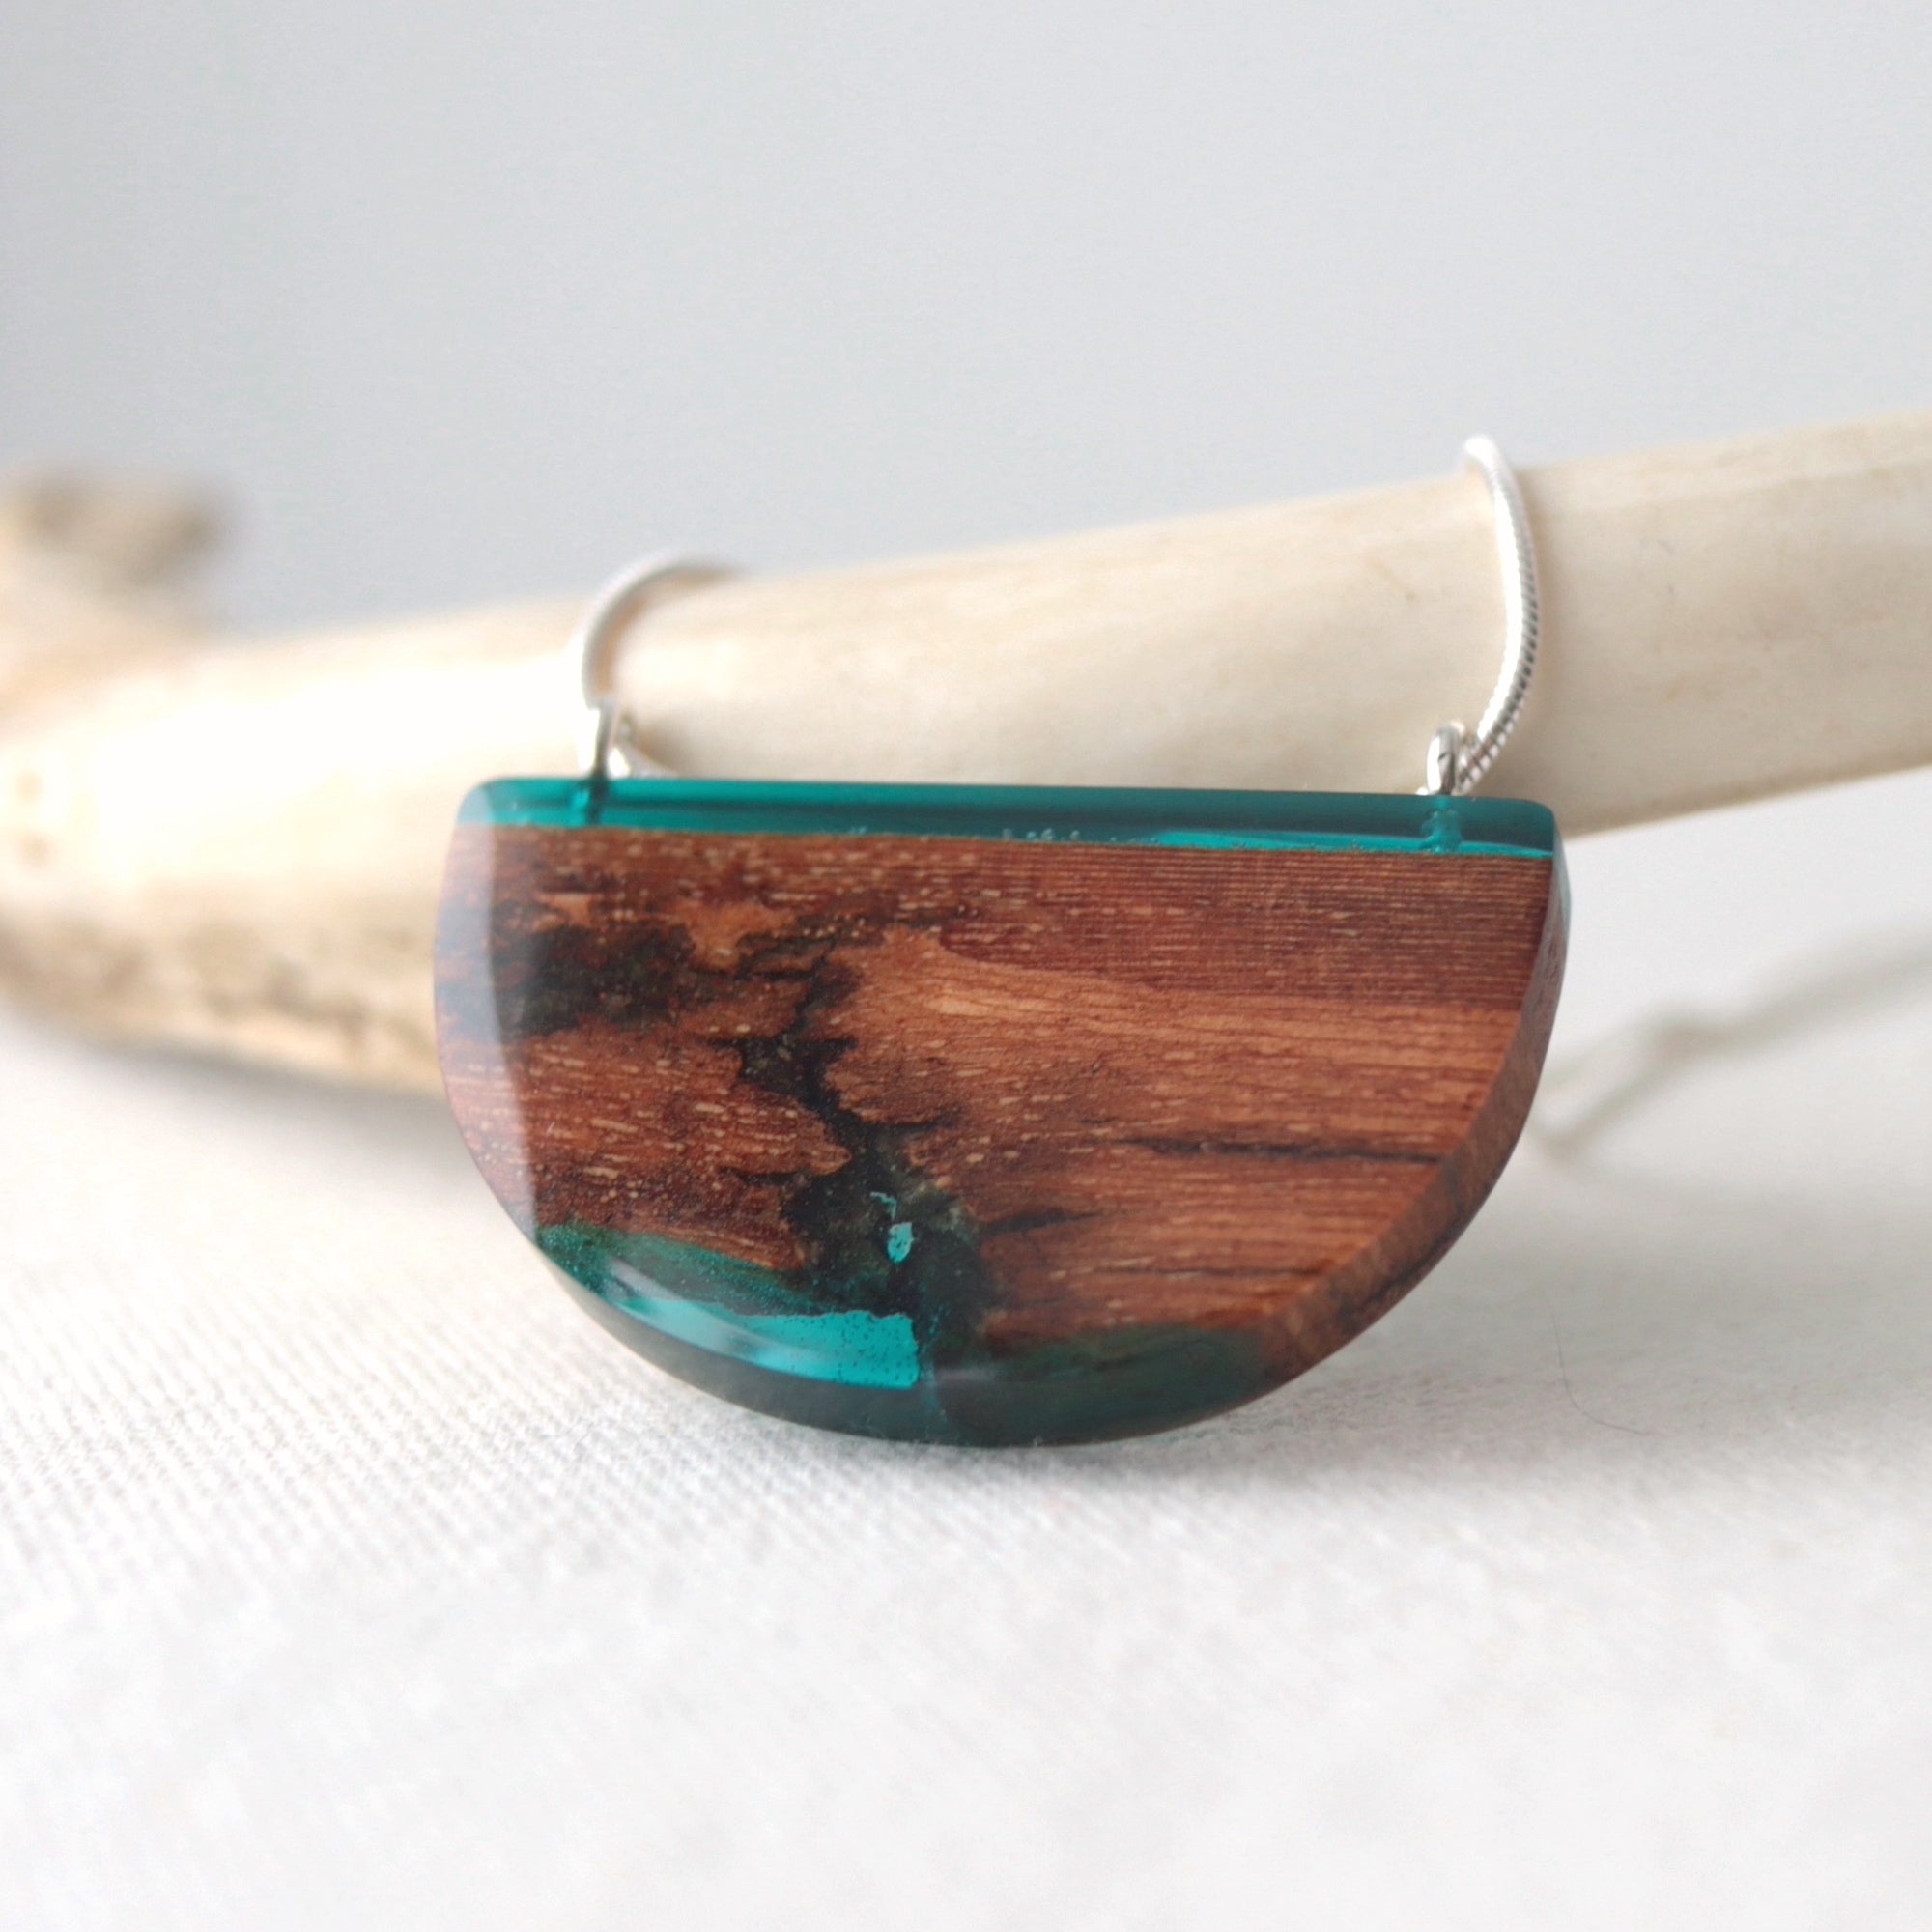 Reclaimed wood bark pendant with blue resin and silver chain by Wild Blue Yonder